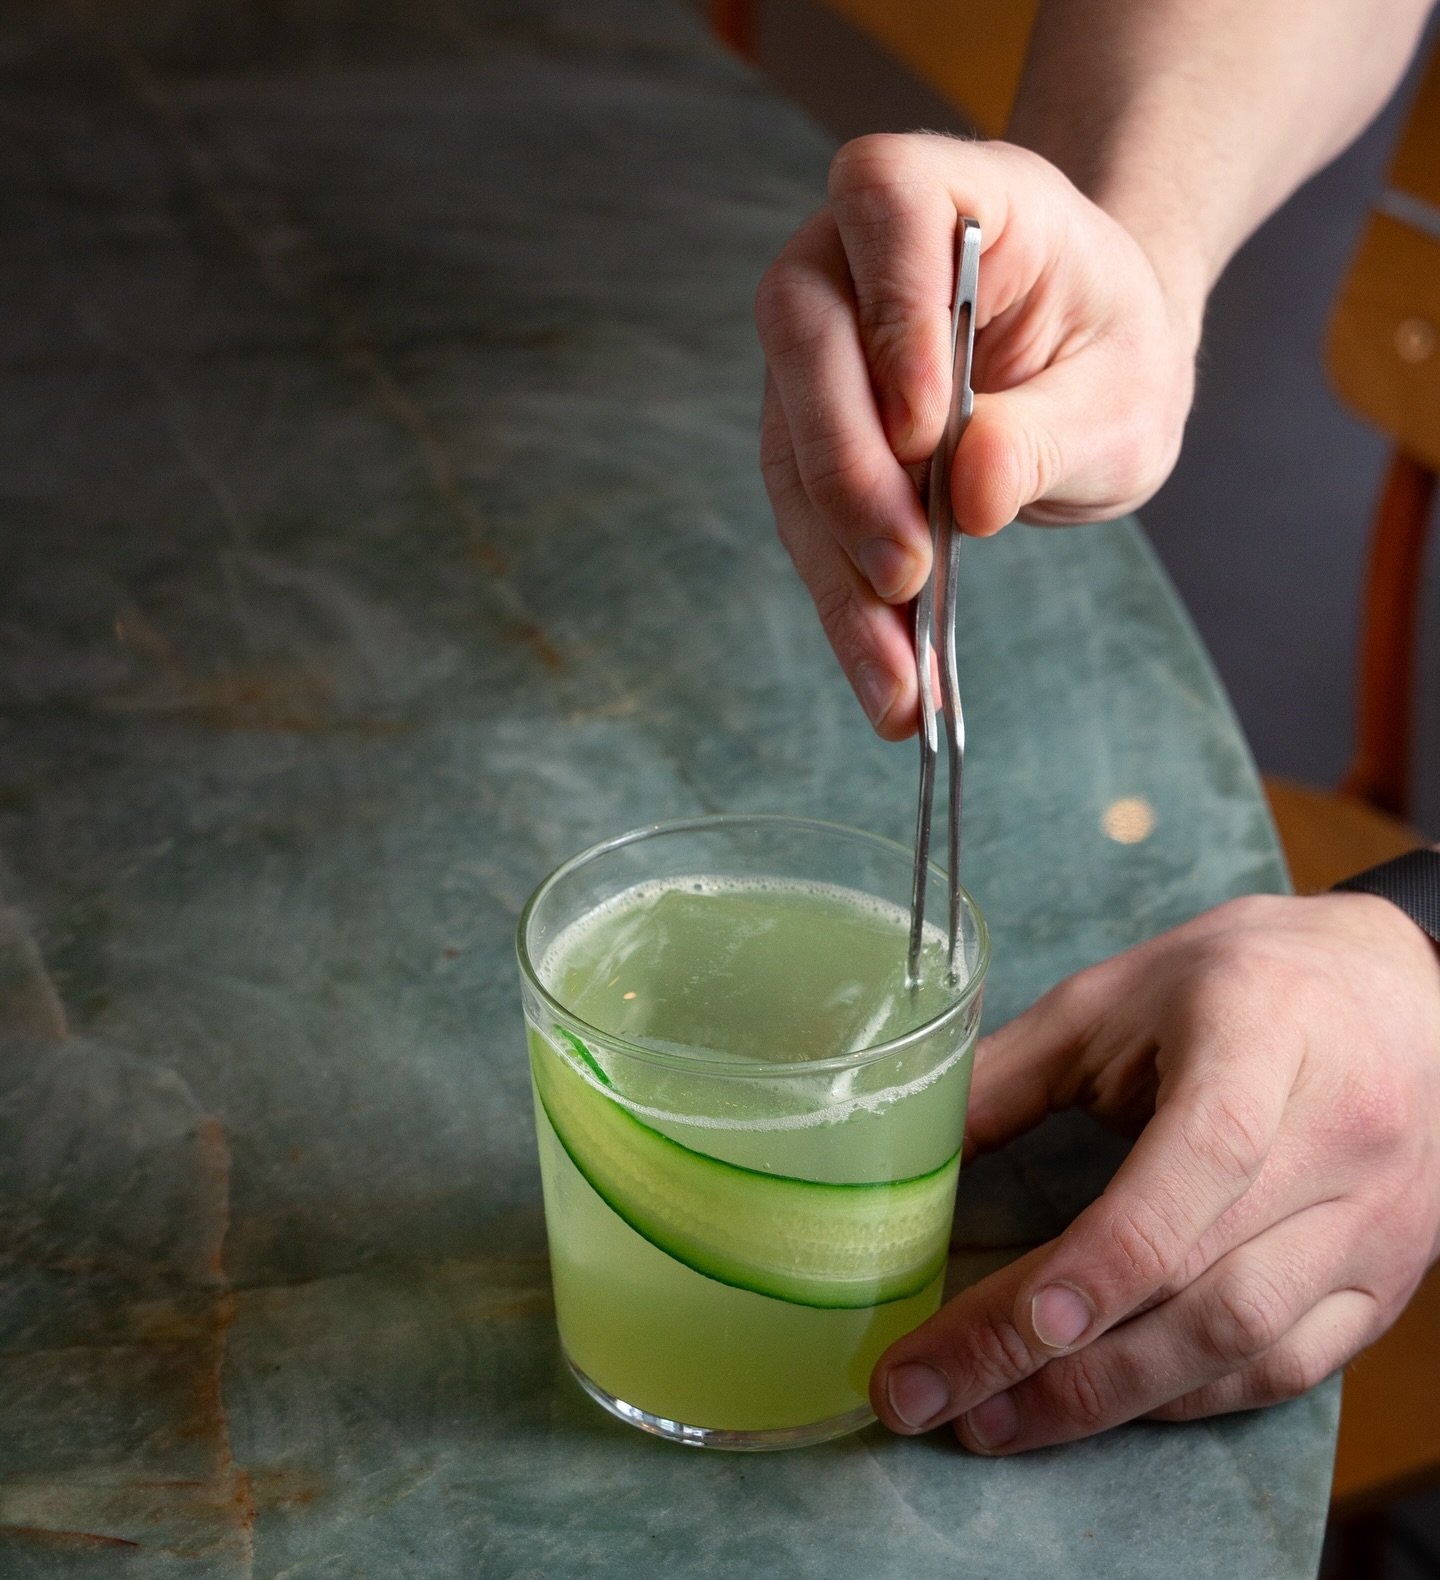 Who&rsquo;s tried our new charity cocktail??

This month we are supporting Western Youth Services with the help of @insolito 

The Papa Picante is a cool and refreshing cucumber, aloe, elderflower &amp; tequila cocktail with a little spicy kick from 